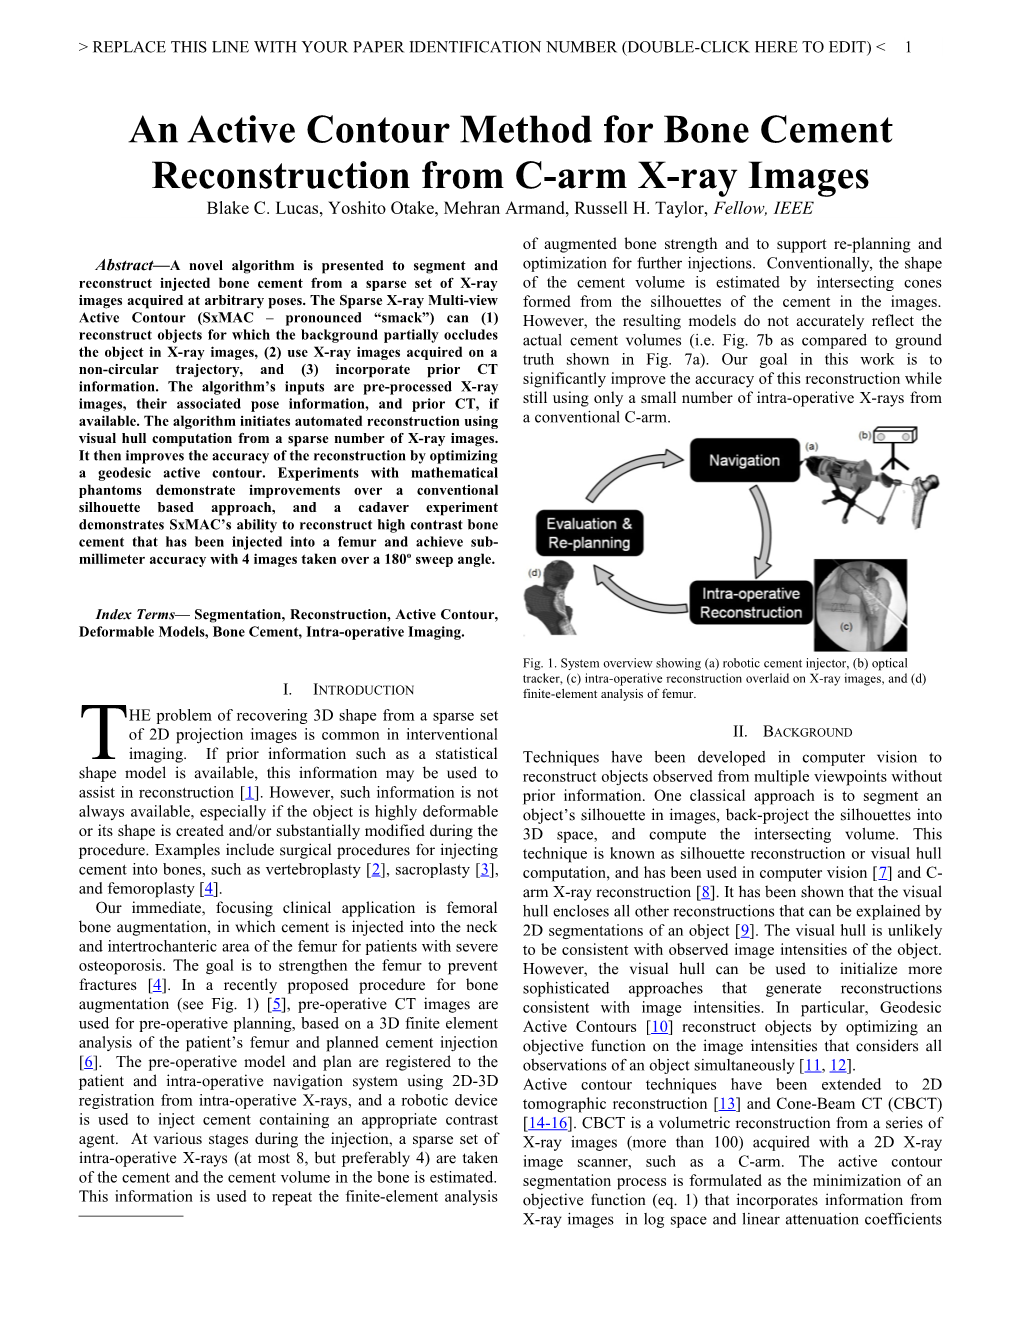 An Active Contour Method for Bone Cement Reconstruction from C-Armx-Ray Images